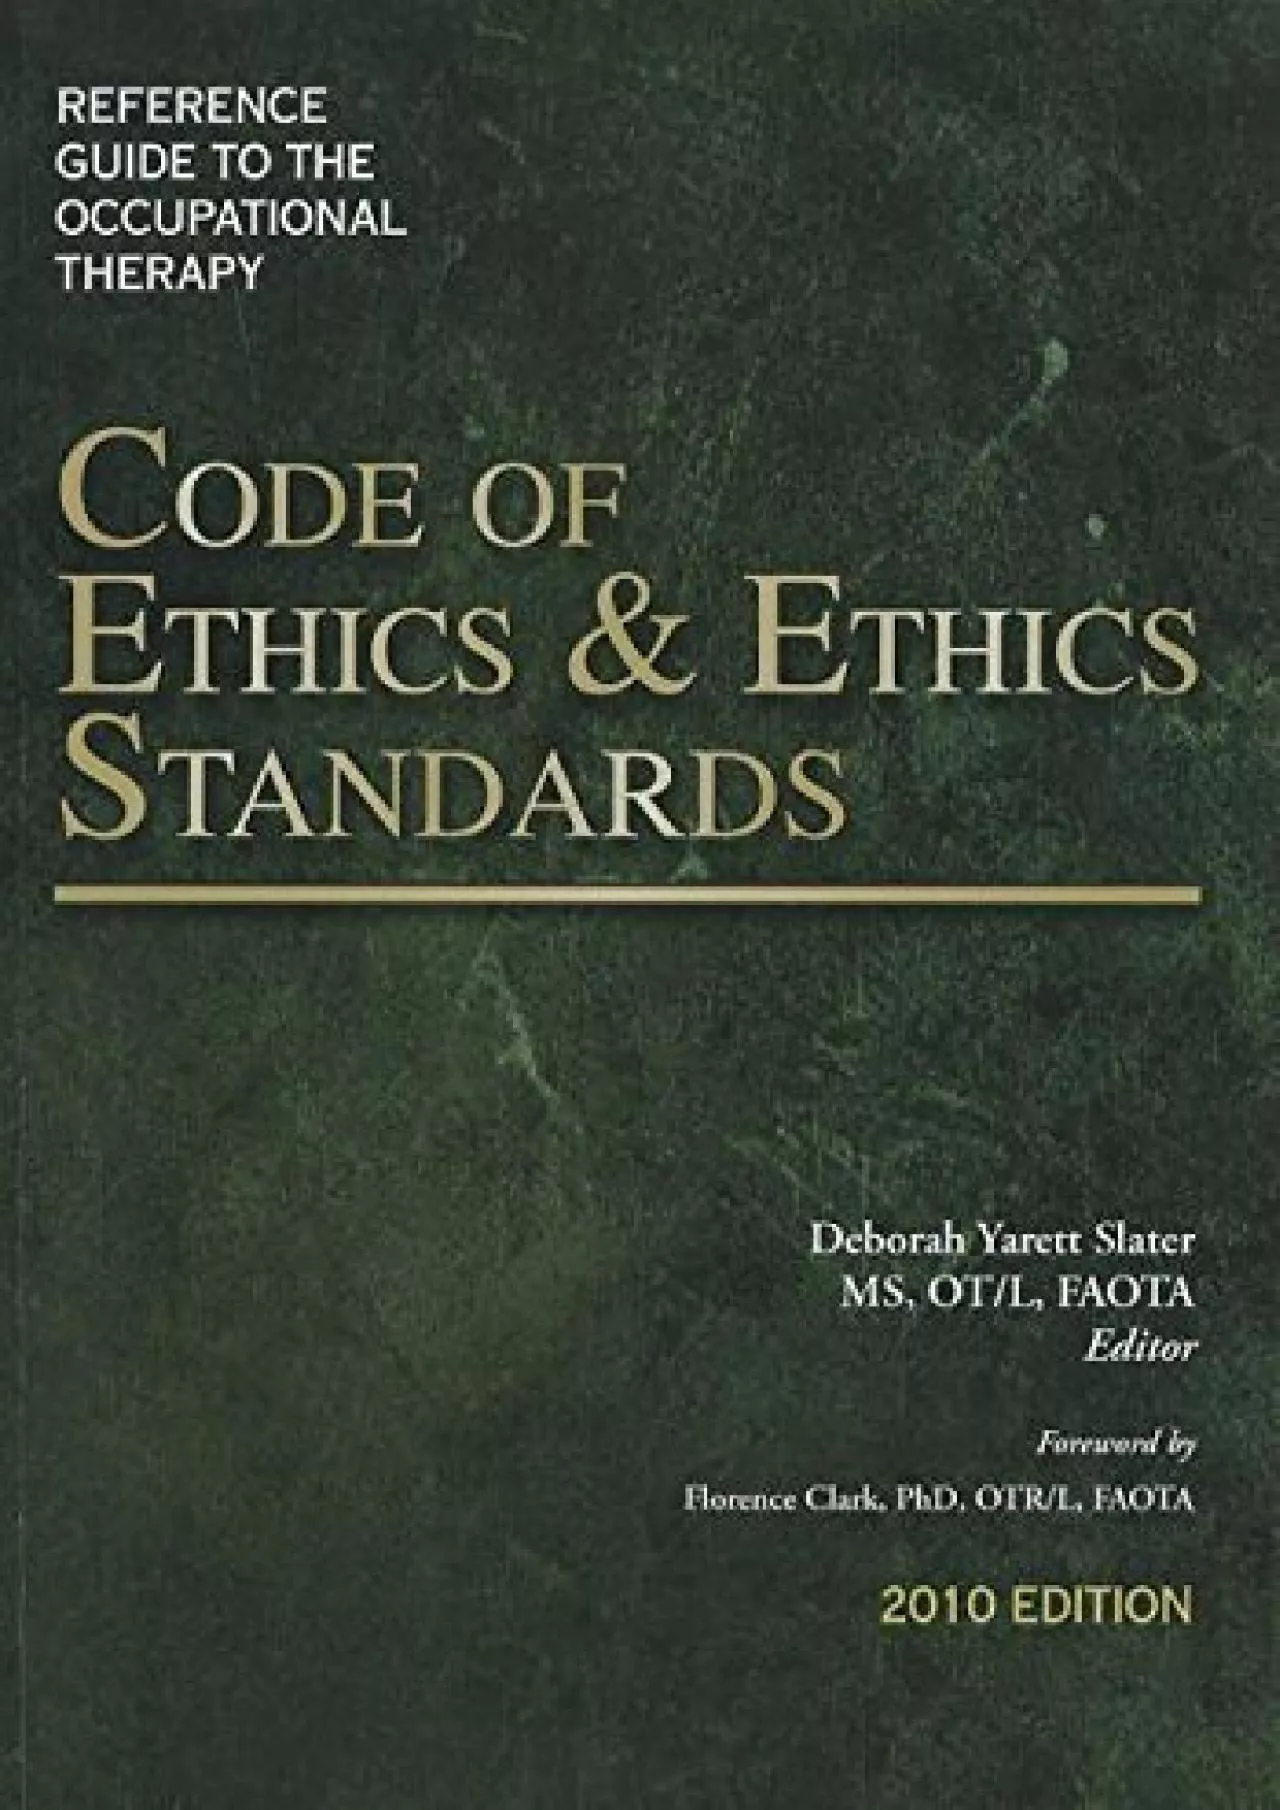 (DOWNLOAD)-Reference Guide to the Occupational Therapy Code of Ethics and Ethics Standards